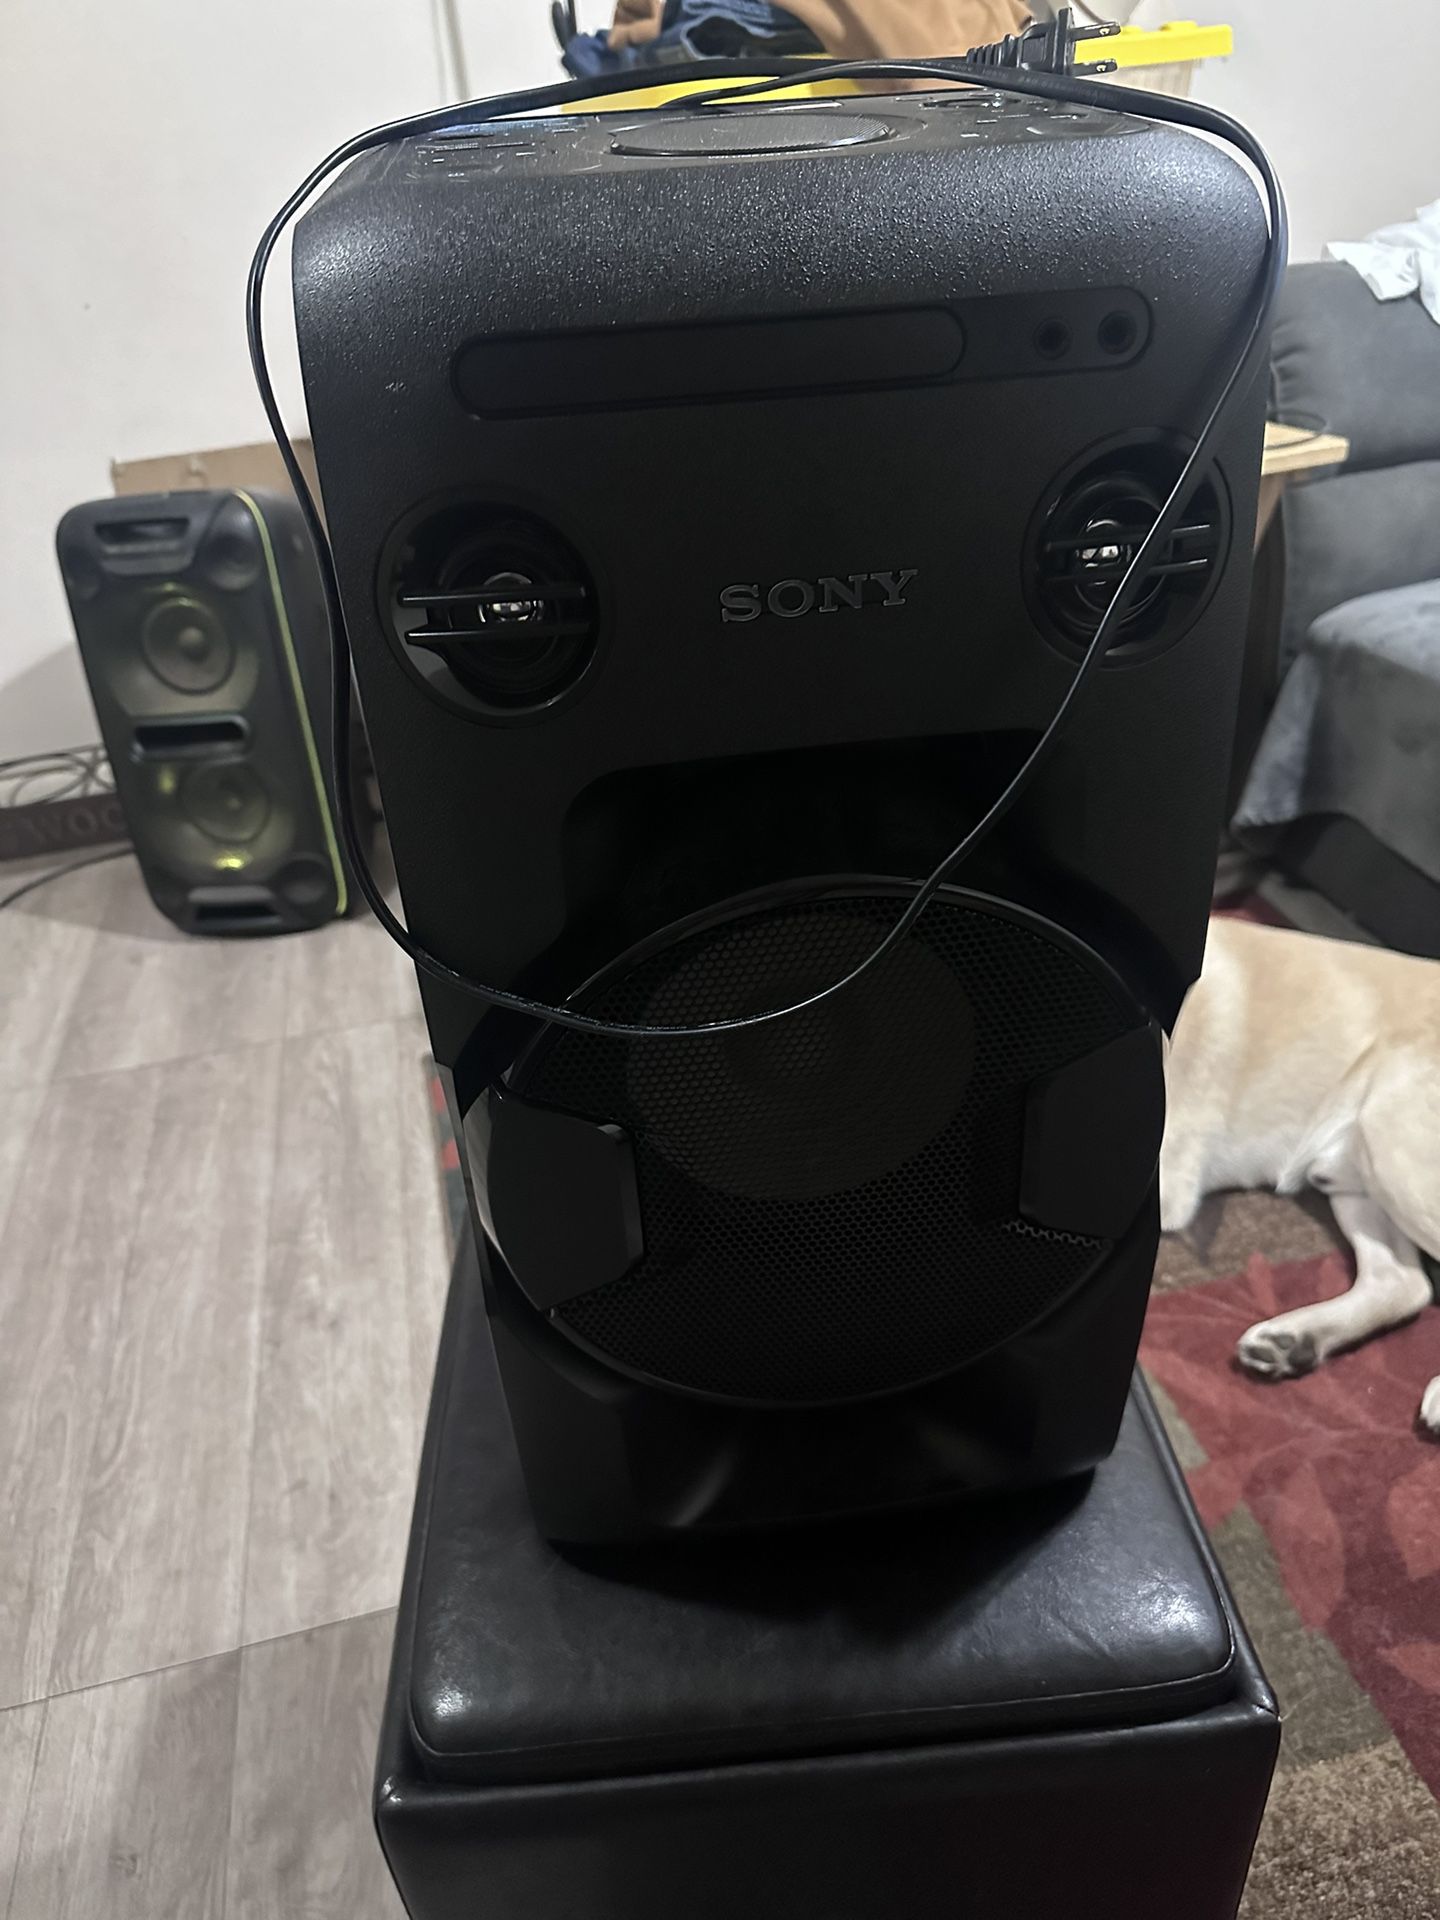 Sony Bluetooth Speaker With CD Player 